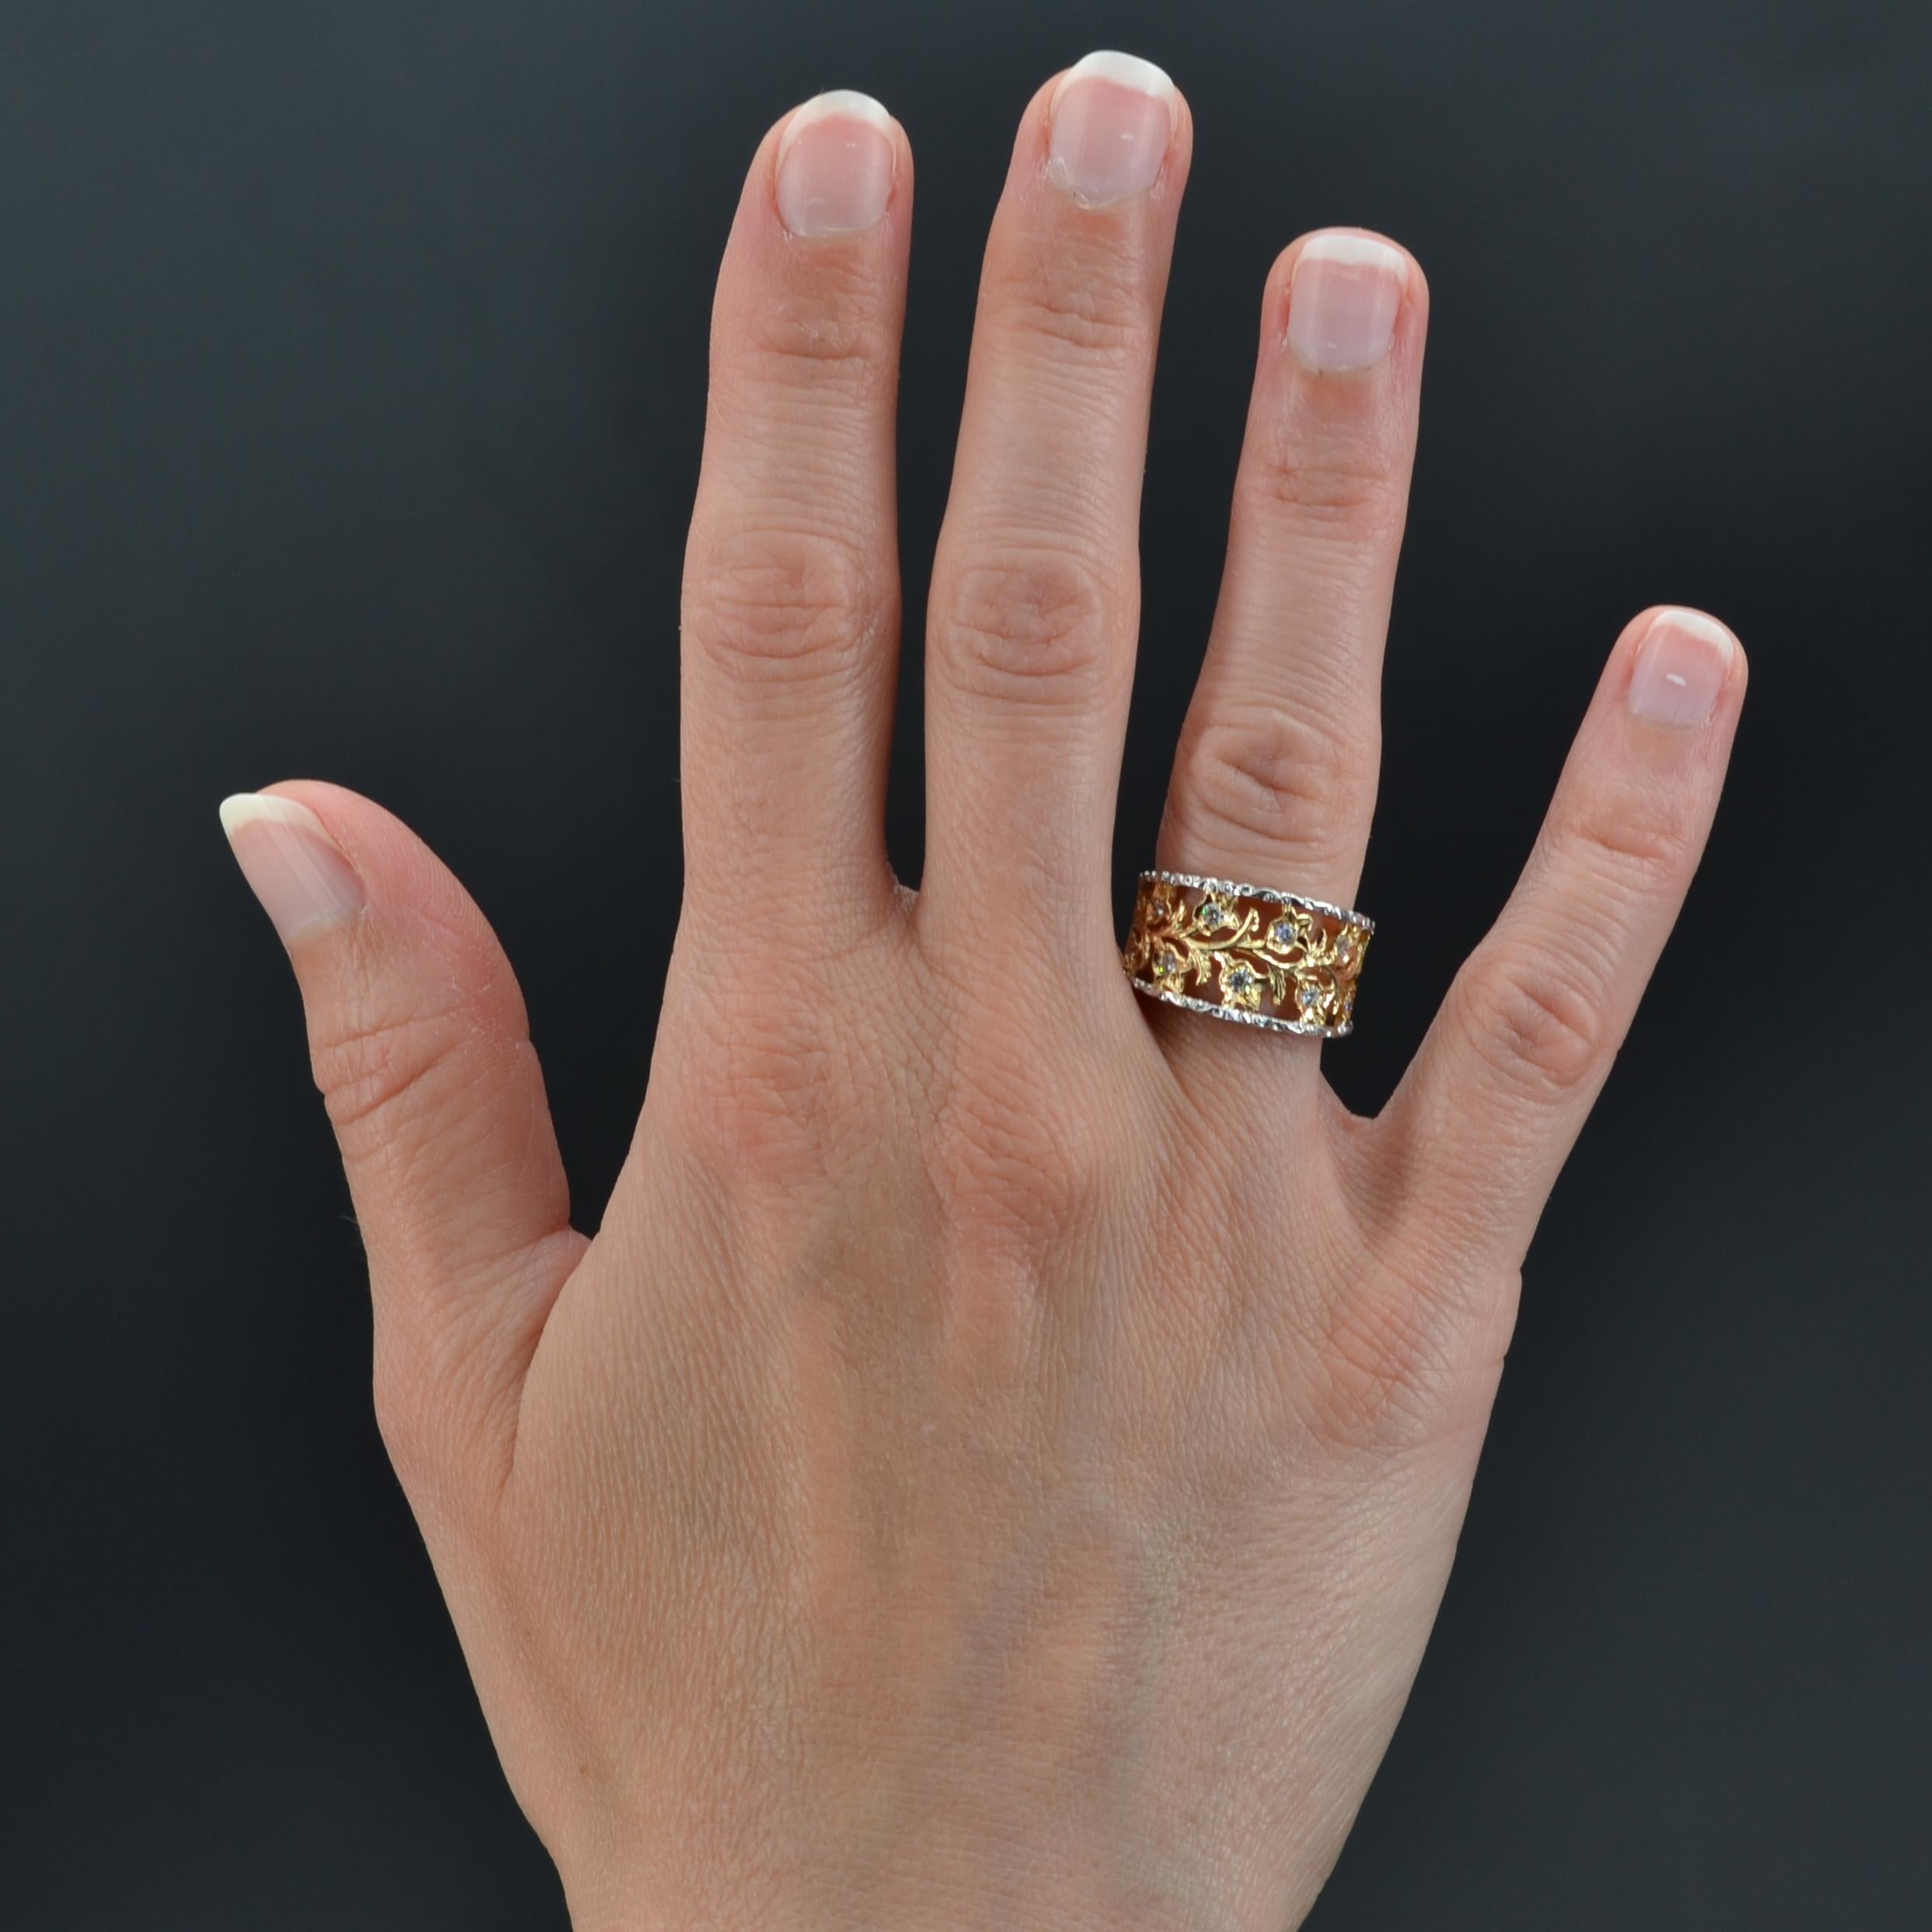 Ring in 18 karat white and yellow gold.
Band ring, it is openworked of a floral decoration in yellow gold whose center of each flower is set with a modern brilliant- cut diamond. The edges of the setting are in chased white gold.
Total weight of the